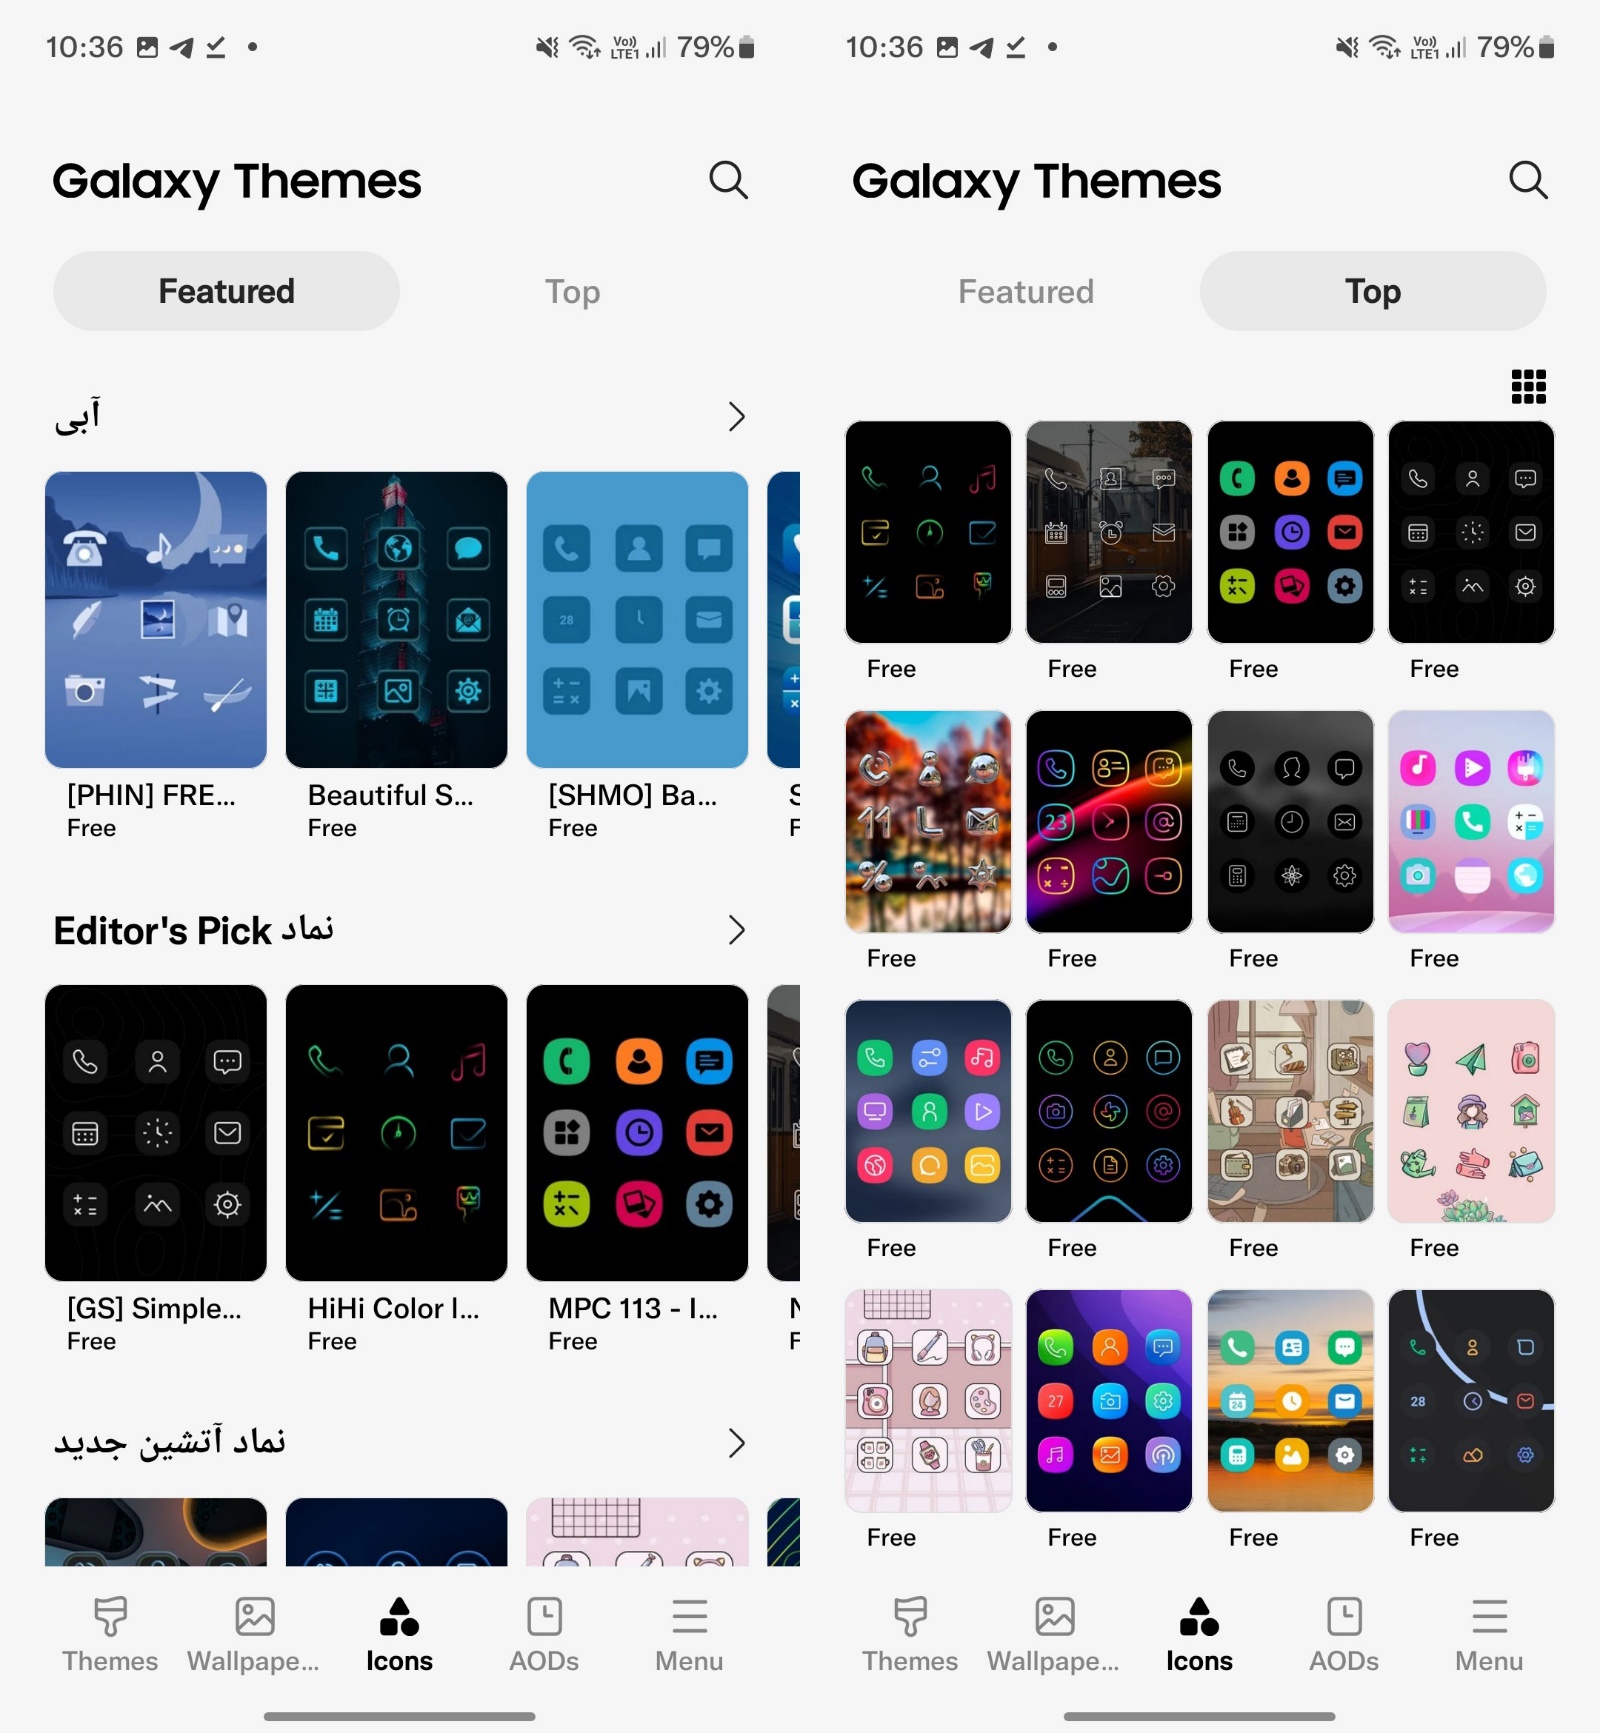 Galaxy Themes icons section